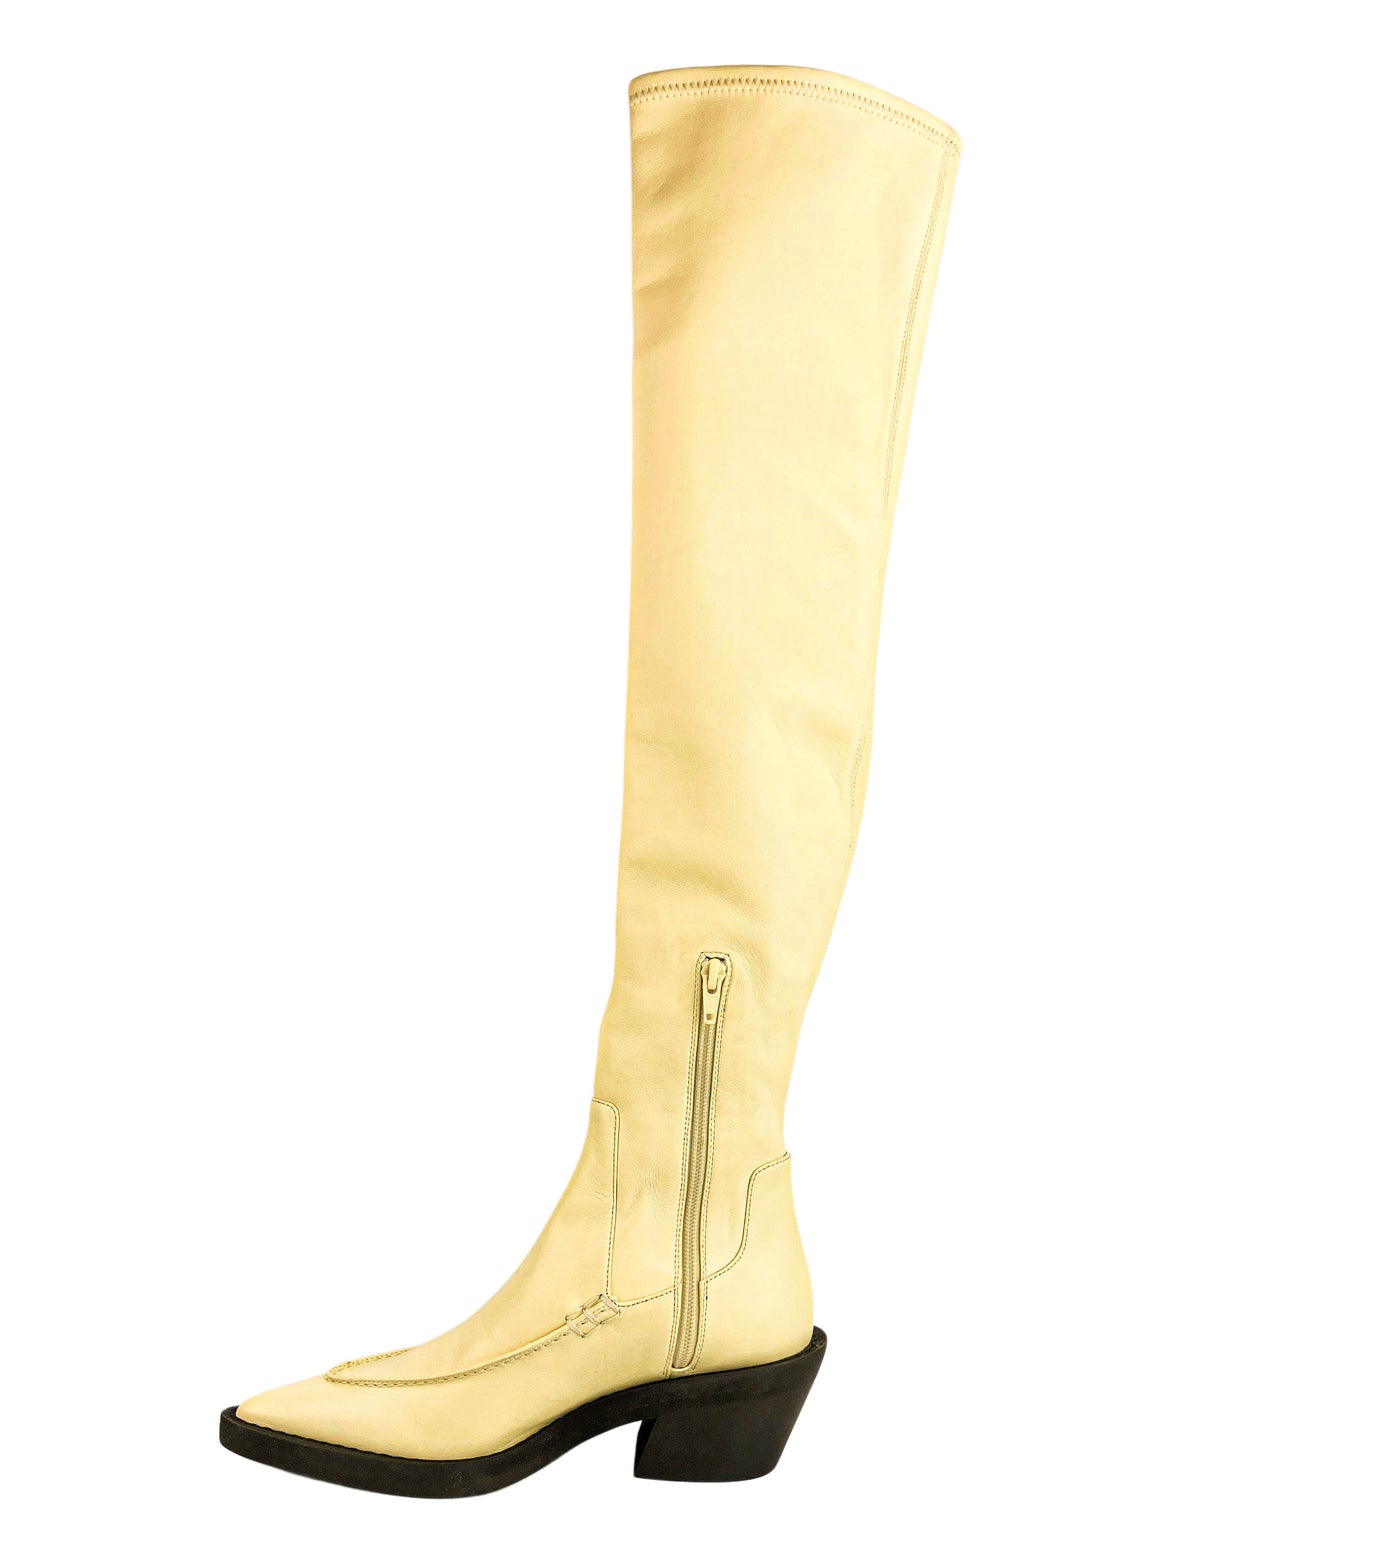 Khaite Charleston Over the Knee Leather Boots in Cream - Discounts on Khaite at UAL